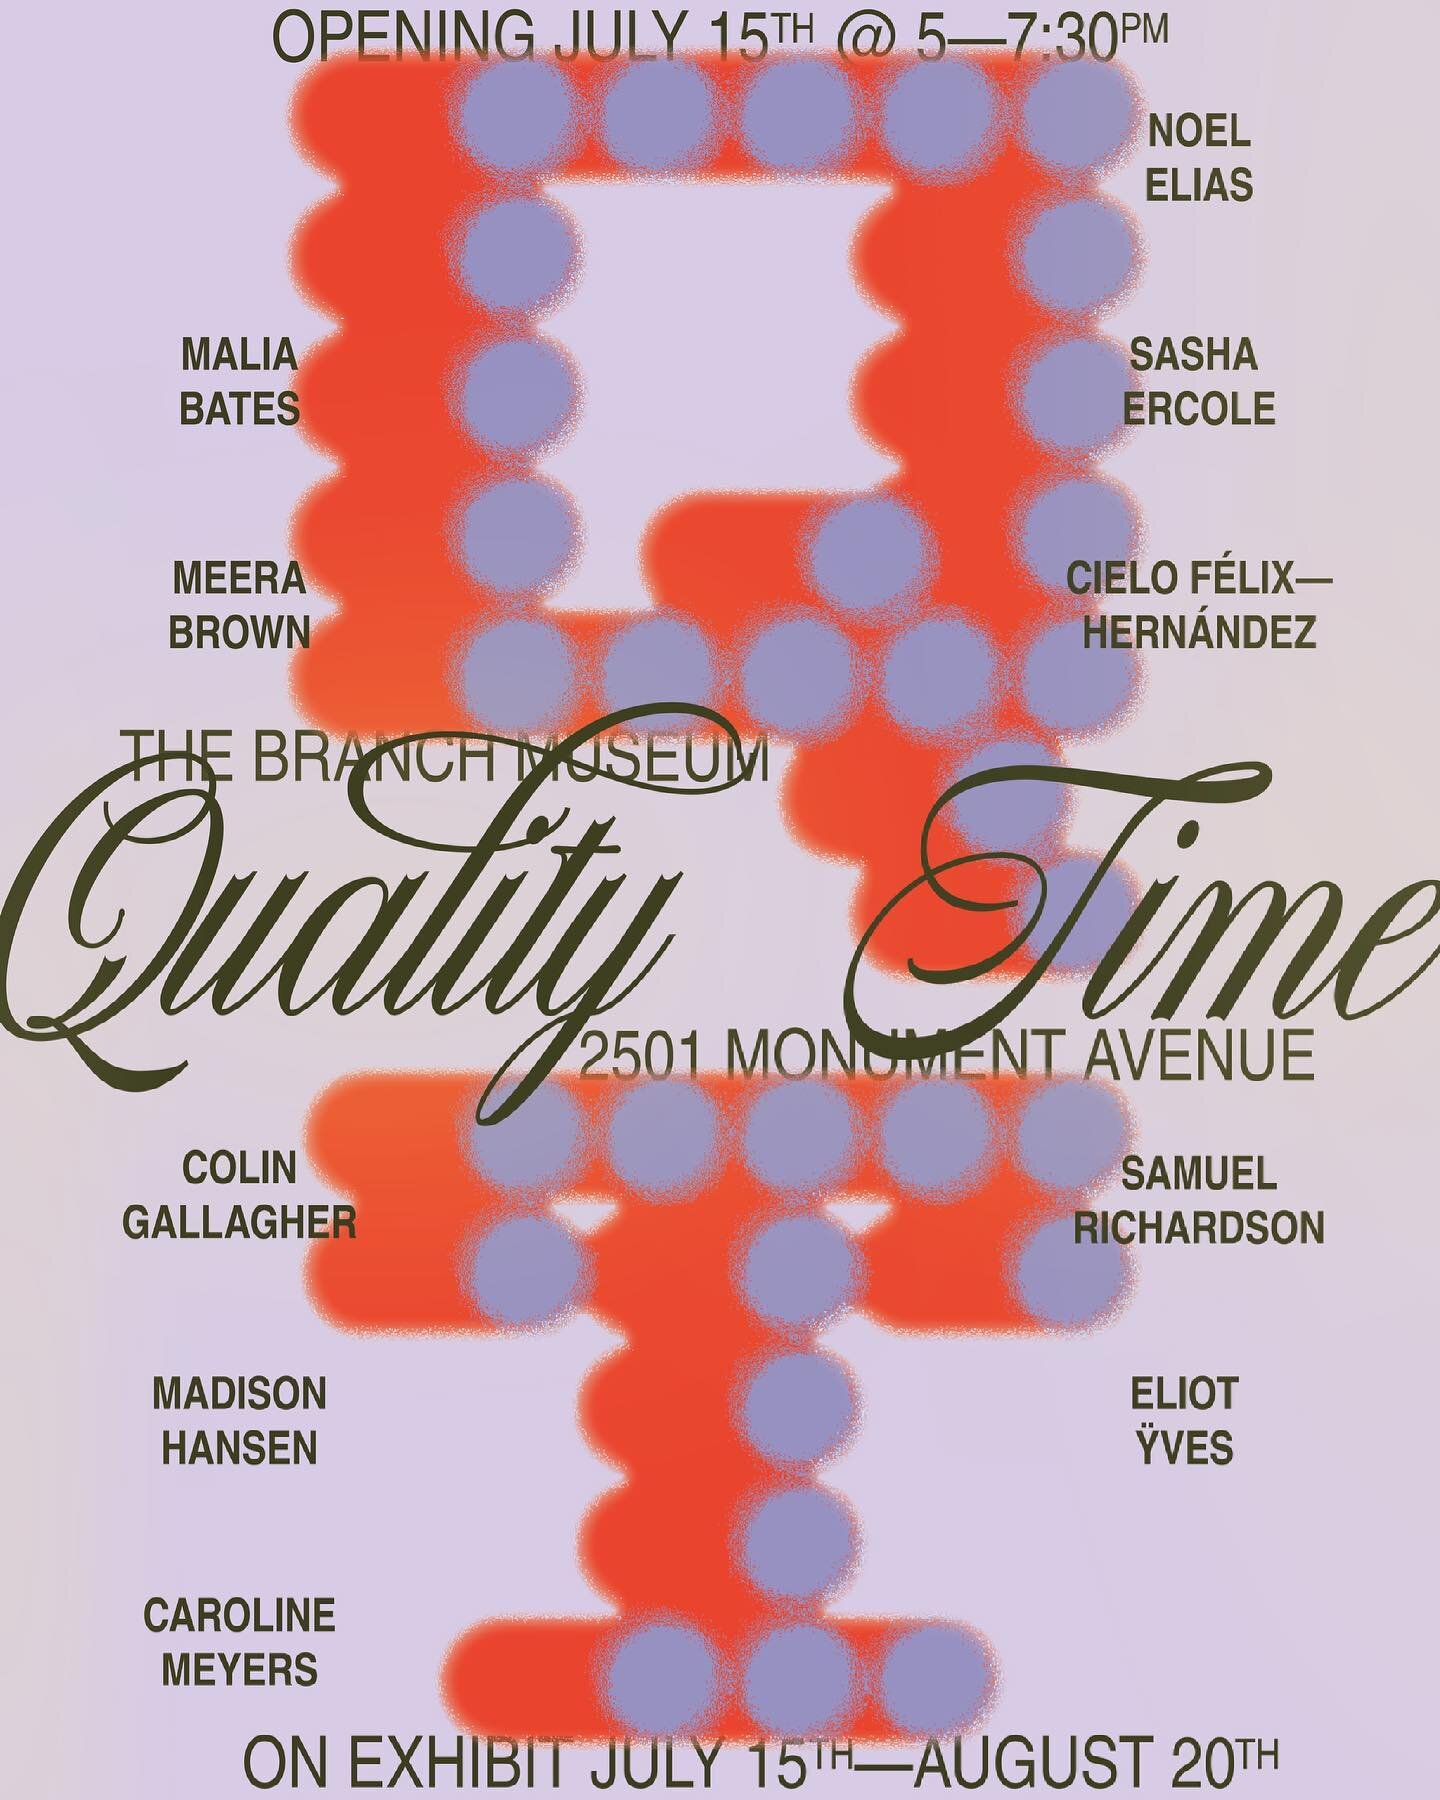 So excited for this group show that we have worked so hard on! Opens on Thursday, July 15th at the Branch Museum in Richmond💘🏃&zwj;♀️🏠🚲 seems like a great evening to see some art if you ask meee 
Graphic designed by @peeohaitchayenkayay 🥰